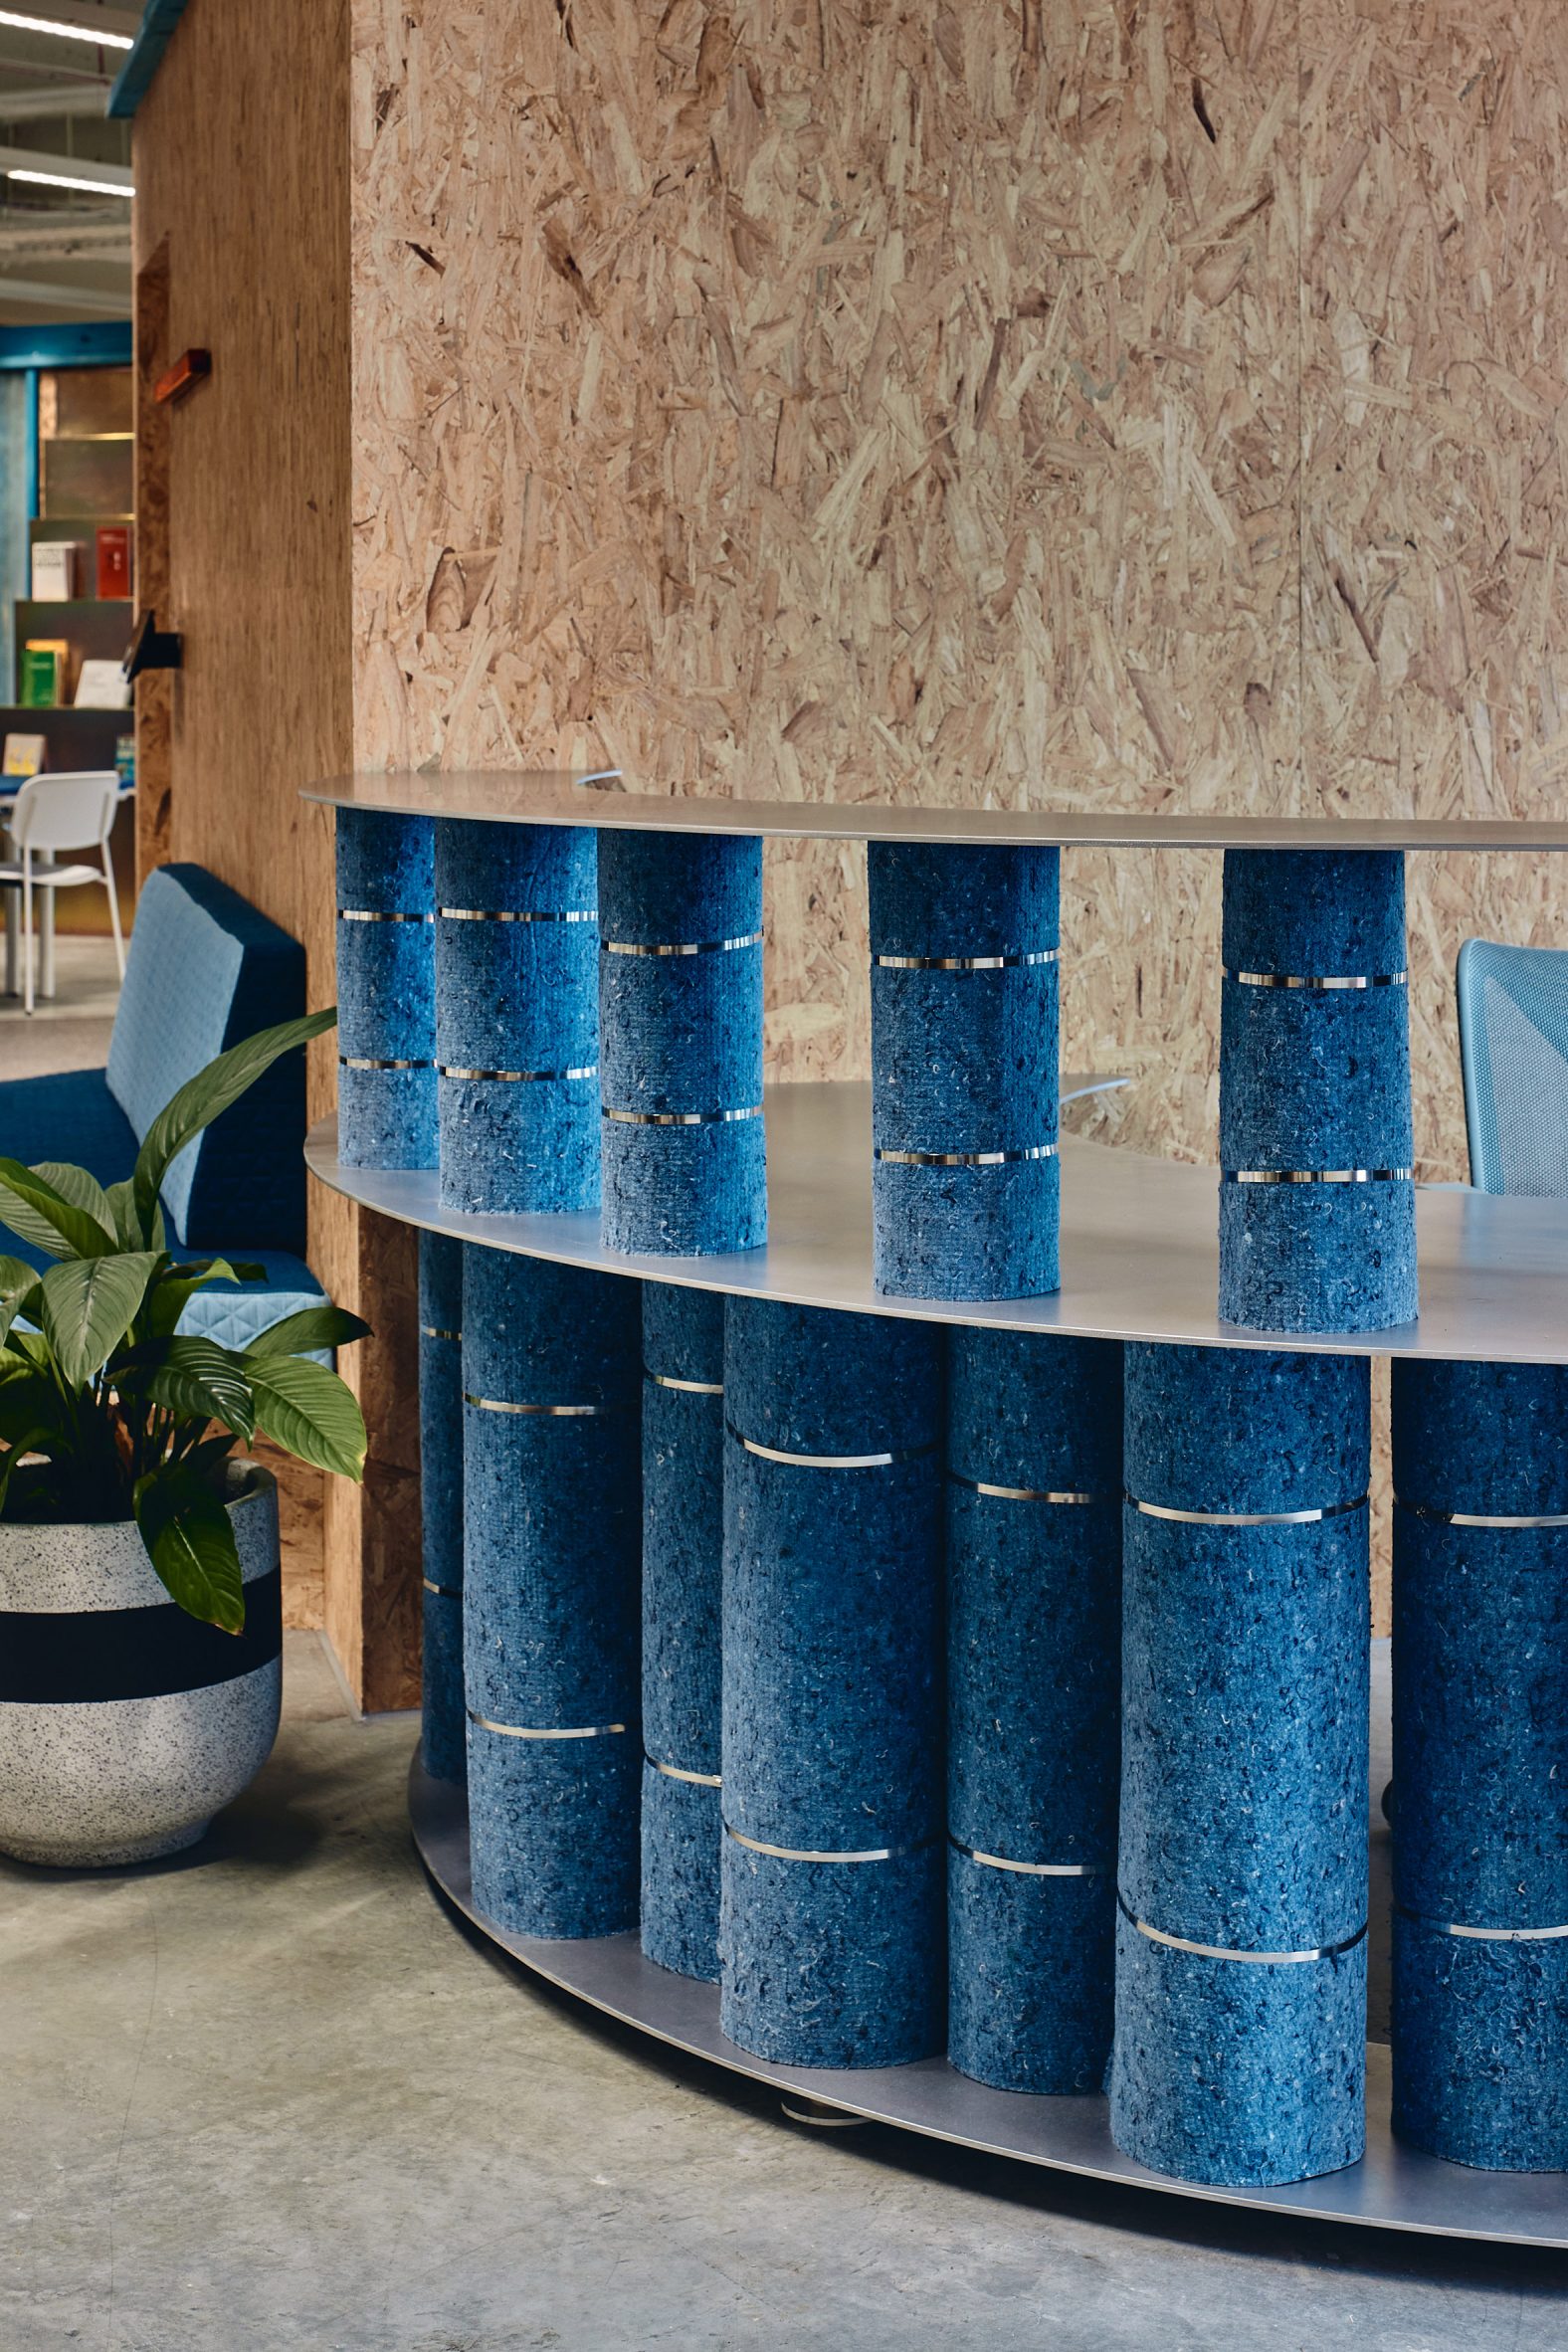 Reception desk made from denim spools in Today Design office by Studio Edwards